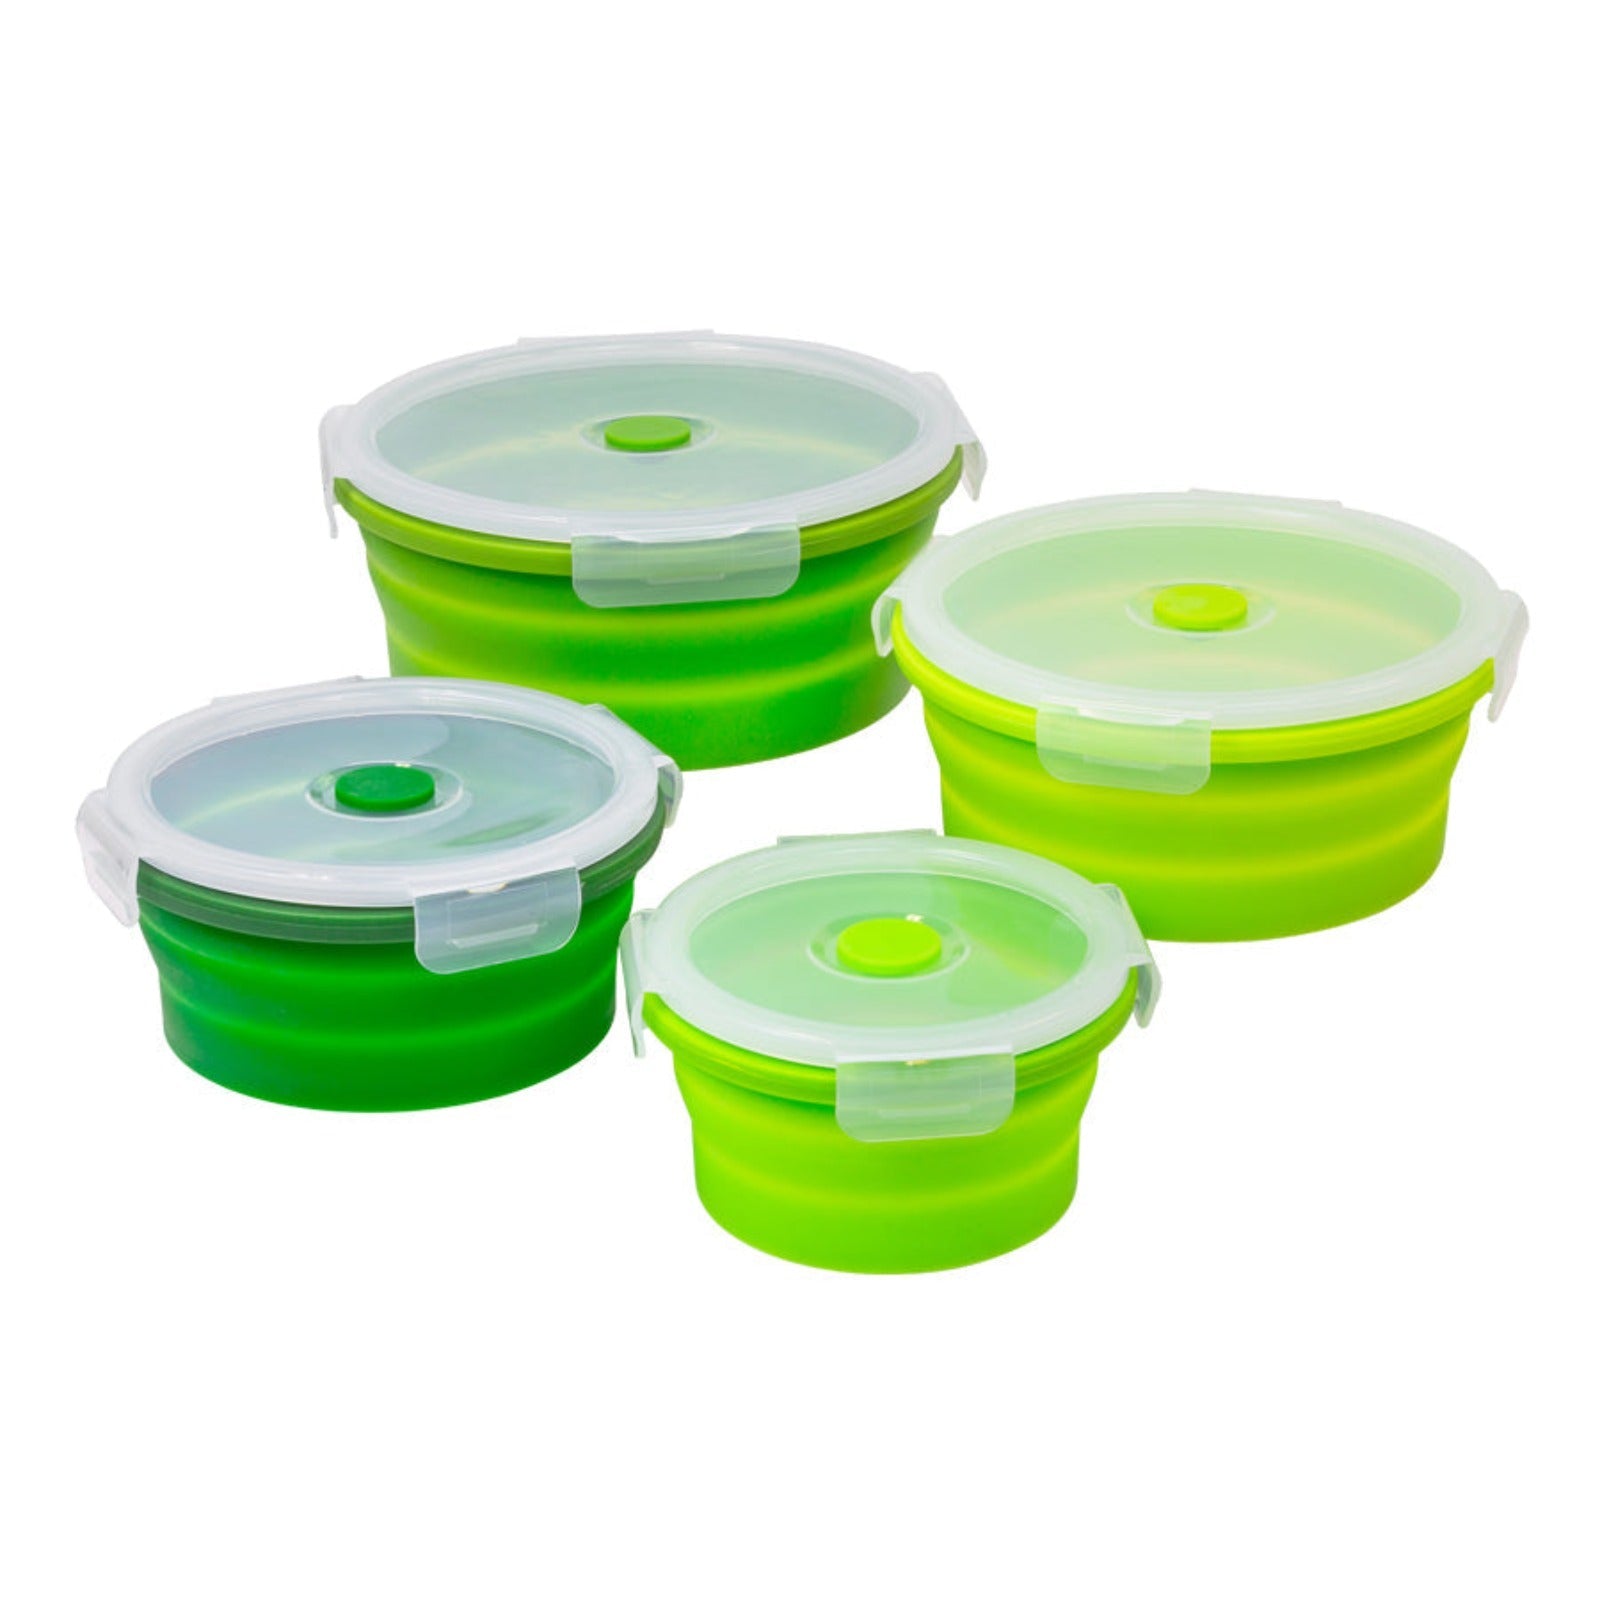 Kleva®Collapsible Silicone Food Container 4 Pack - Eco Friendly Alternative!  Bunnings Marketplace   